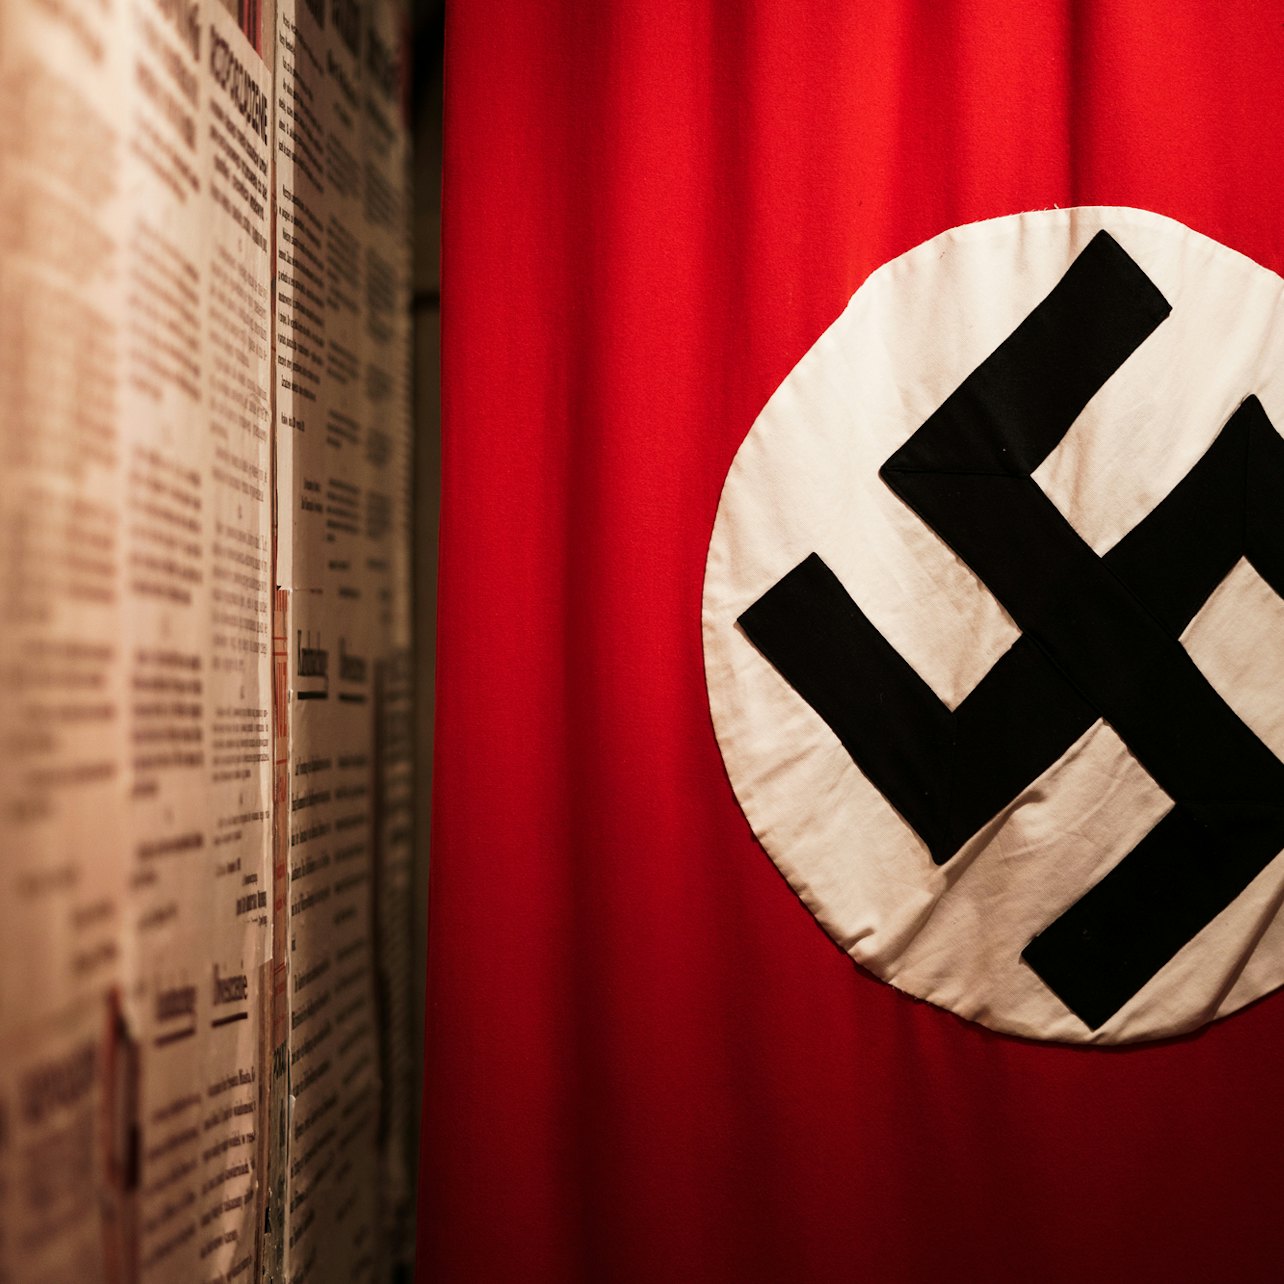 Schindler’s Factory Museum: Skip The Line + Guided Tour - Accommodations in Krakow